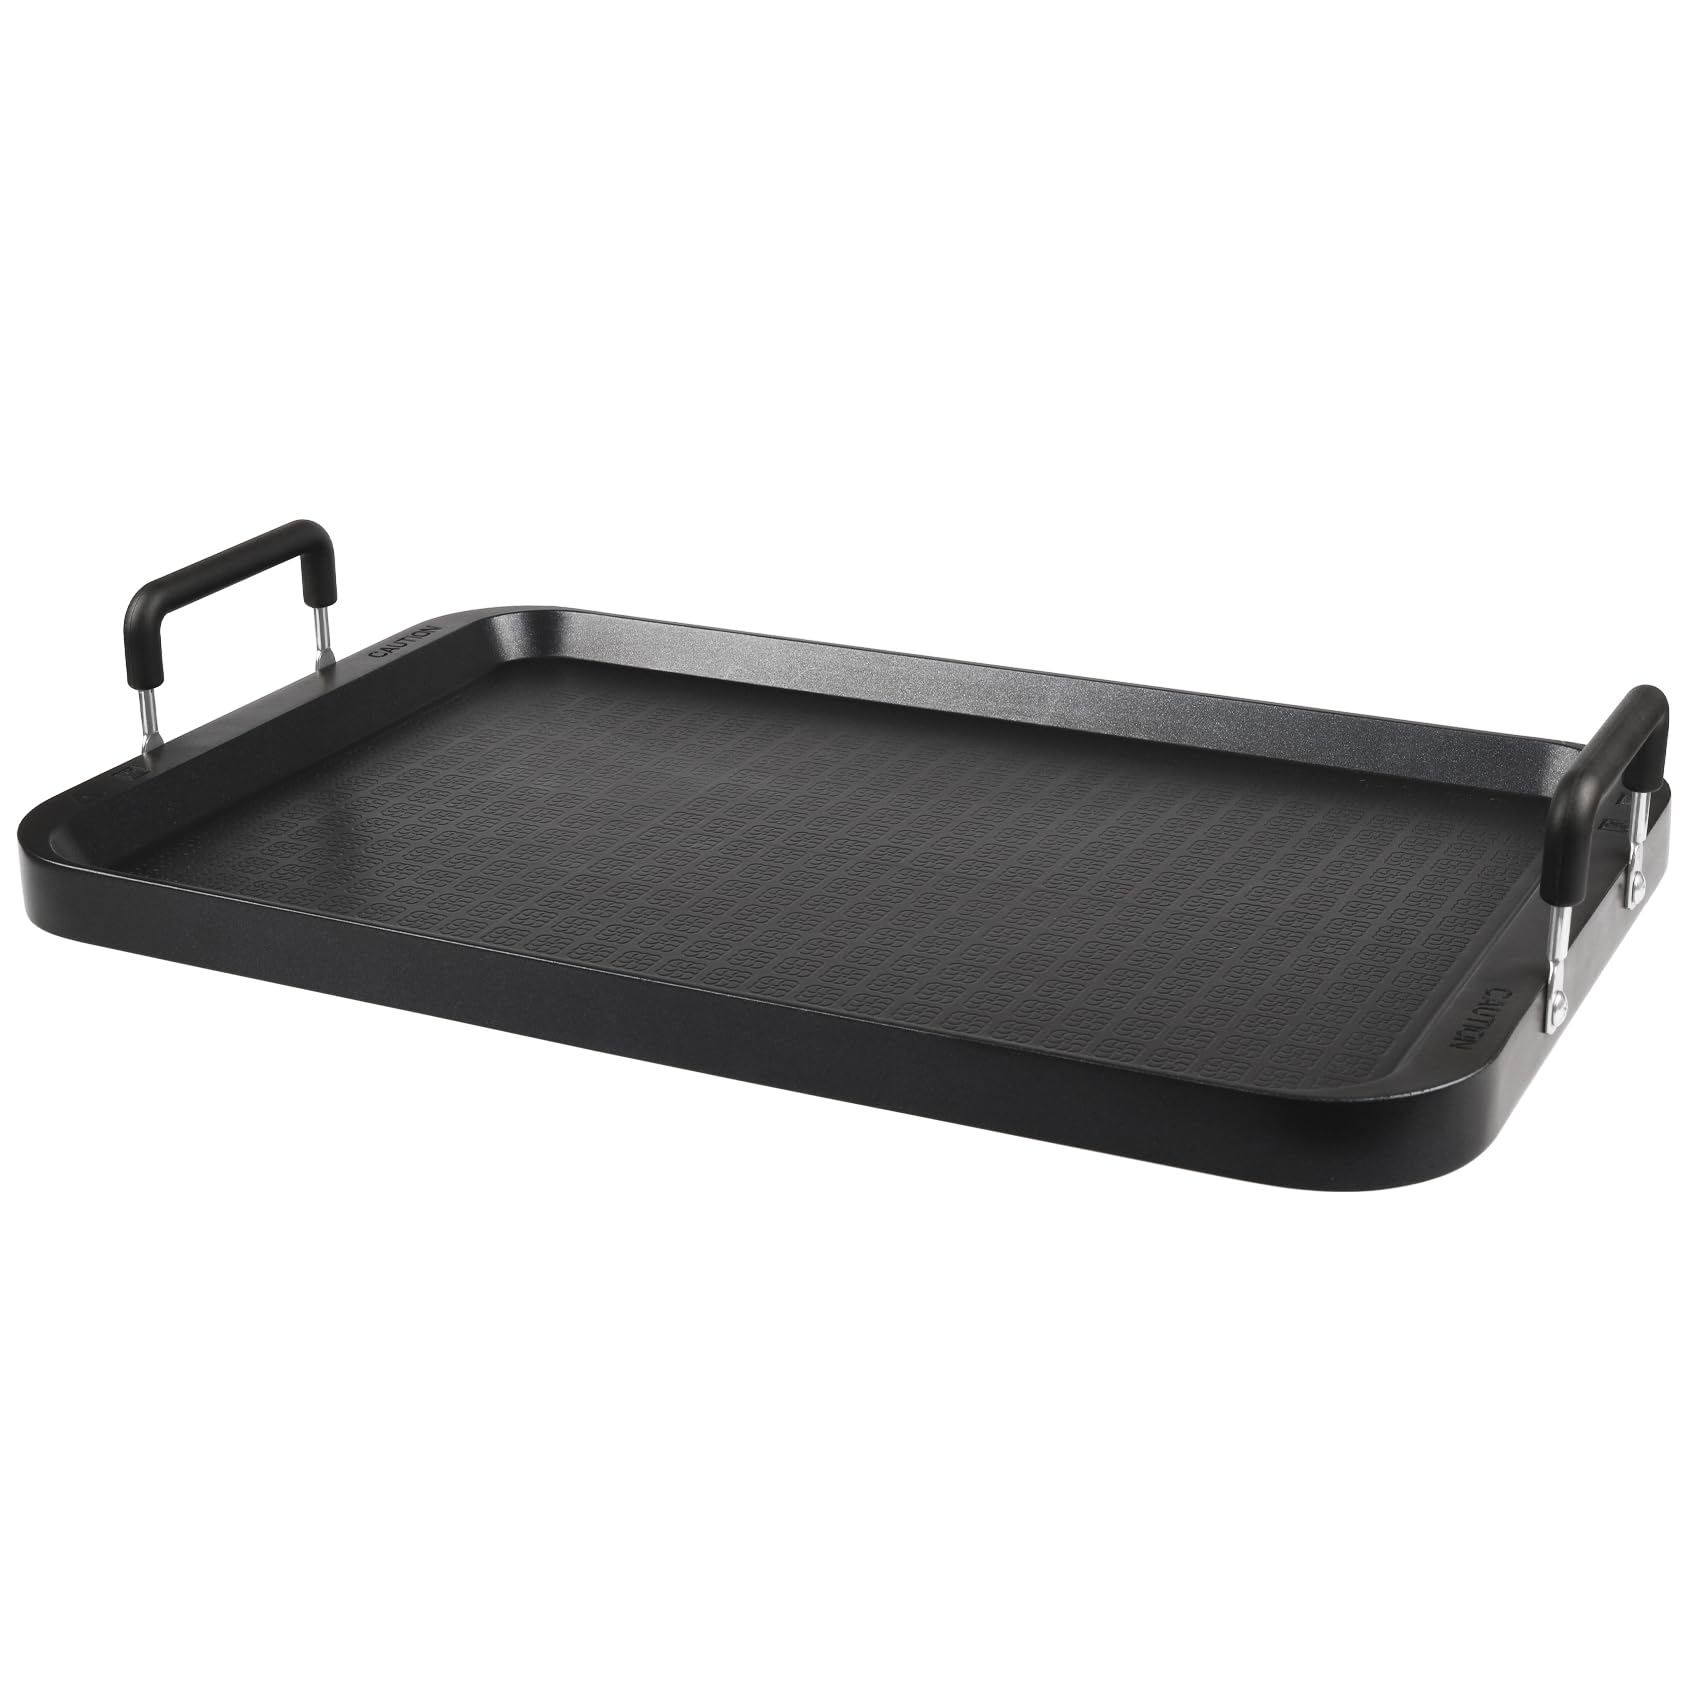 Vayepro Stove Top Flat Griddle